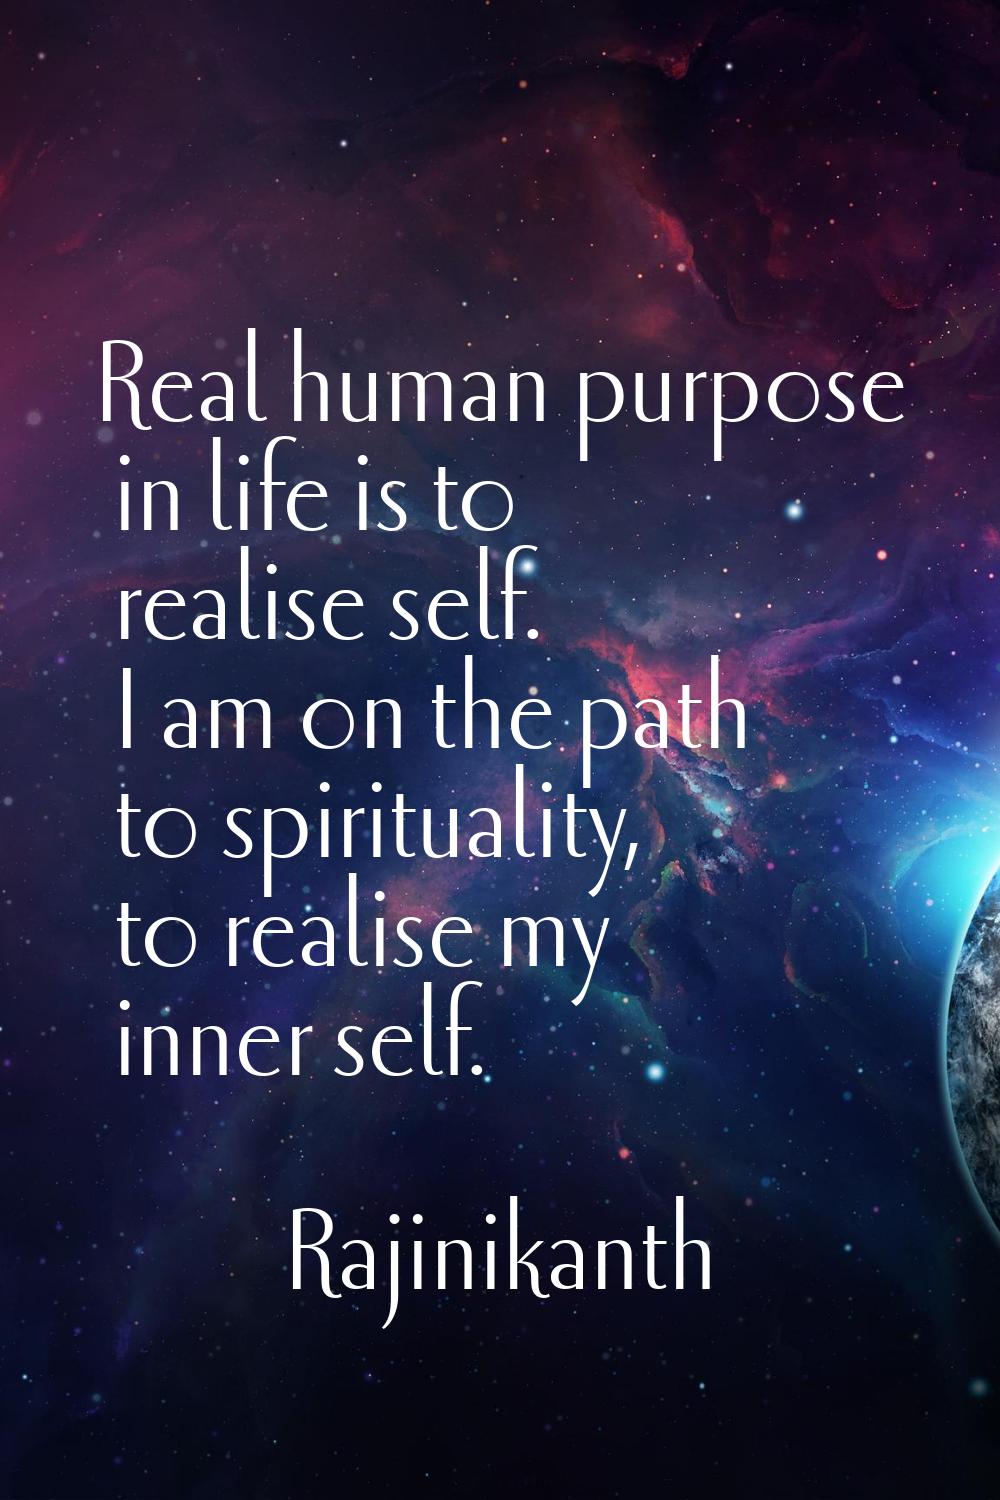 Real human purpose in life is to realise self. I am on the path to spirituality, to realise my inne